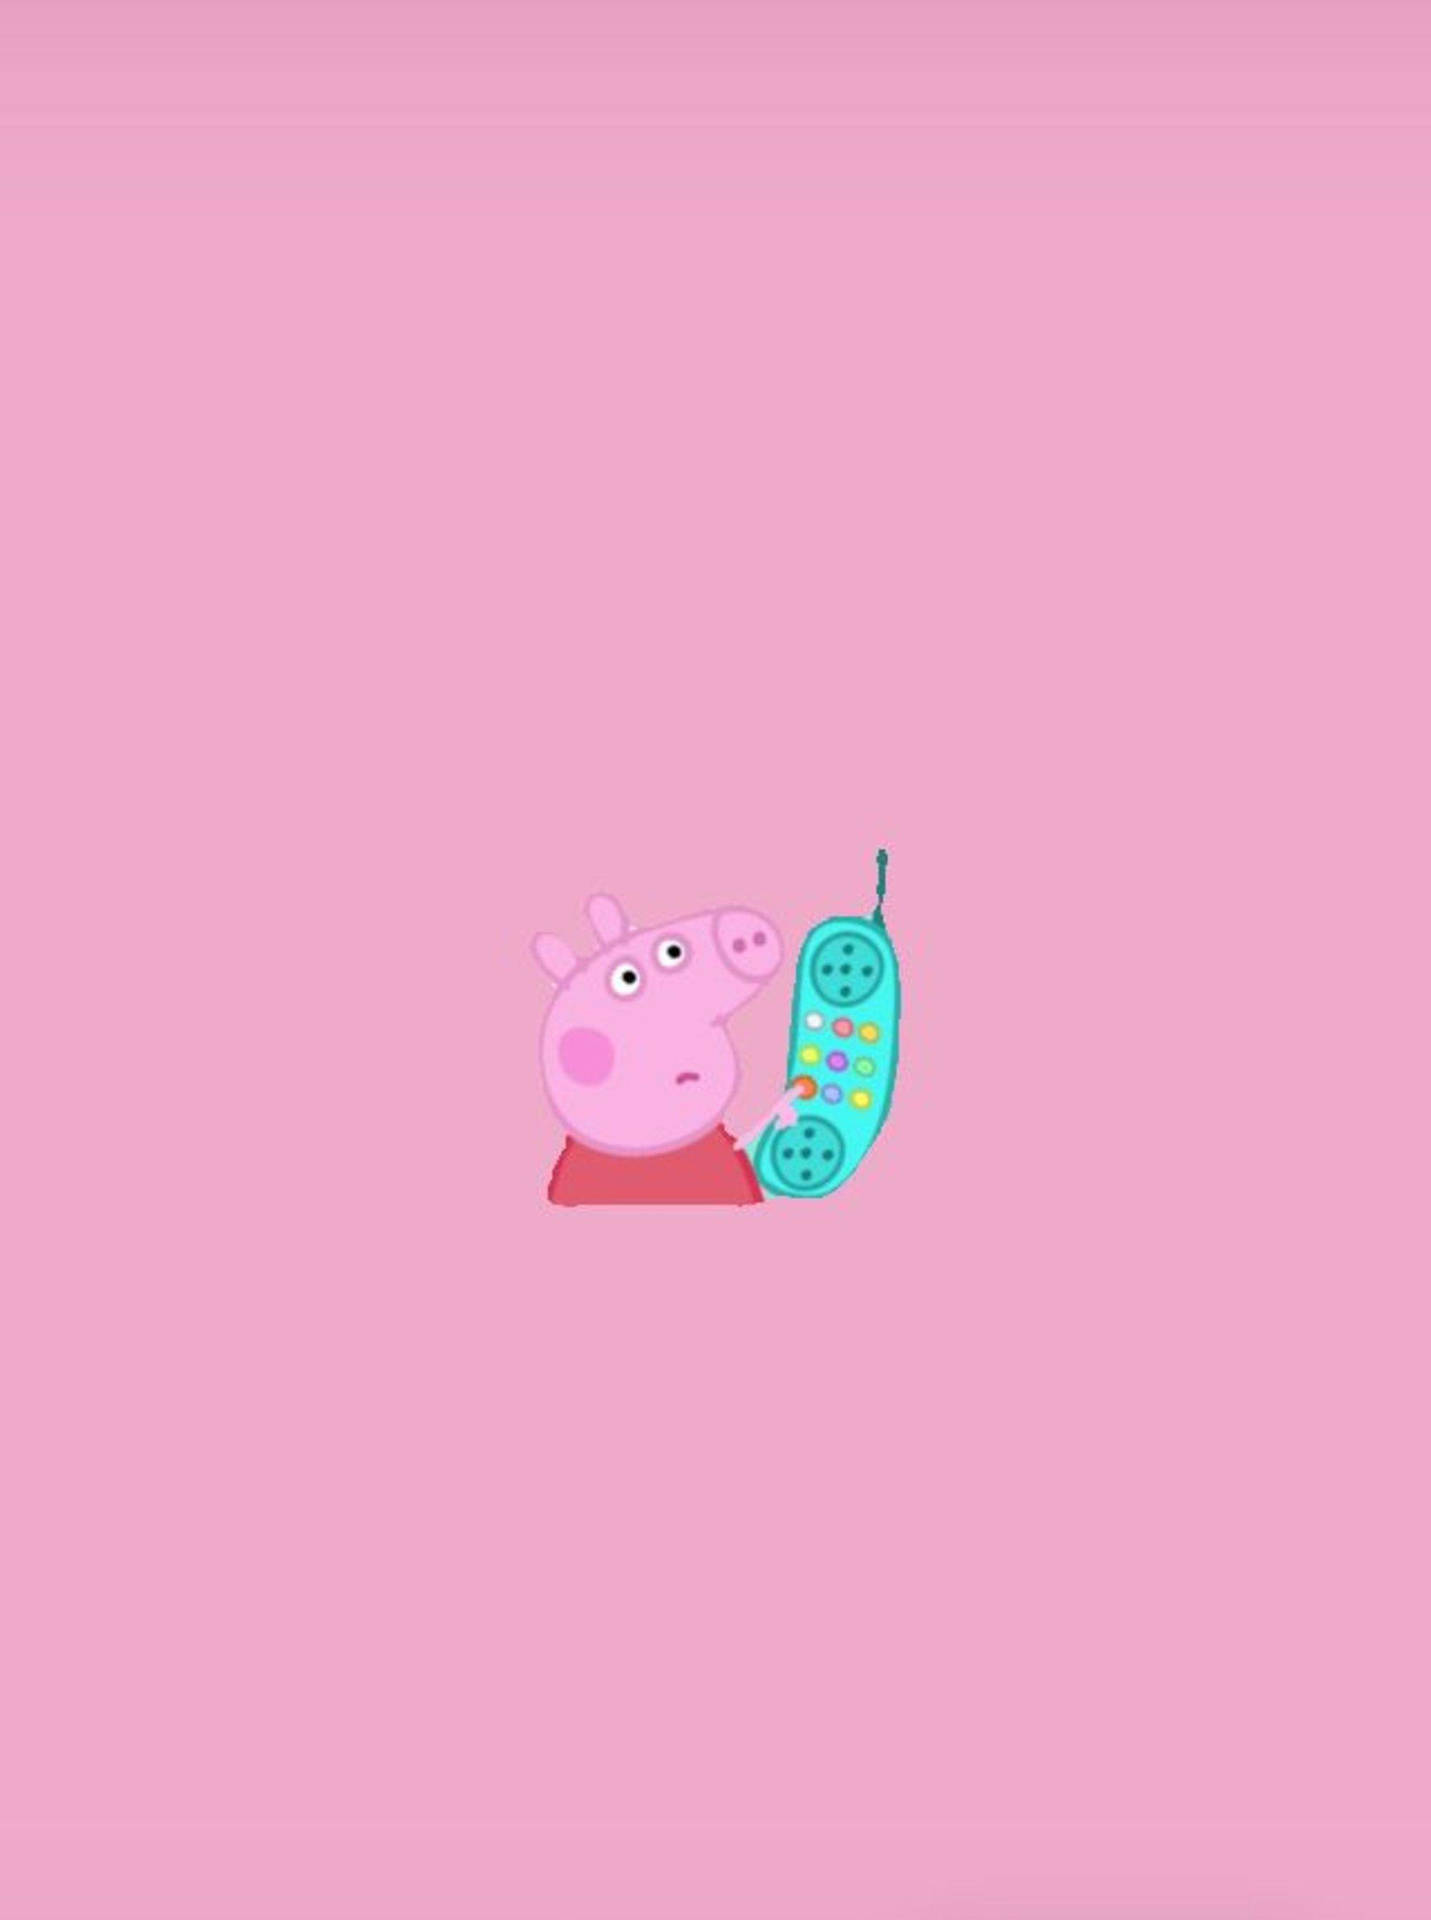 Peppa Pig On A Phone Screen With Pink Background Background